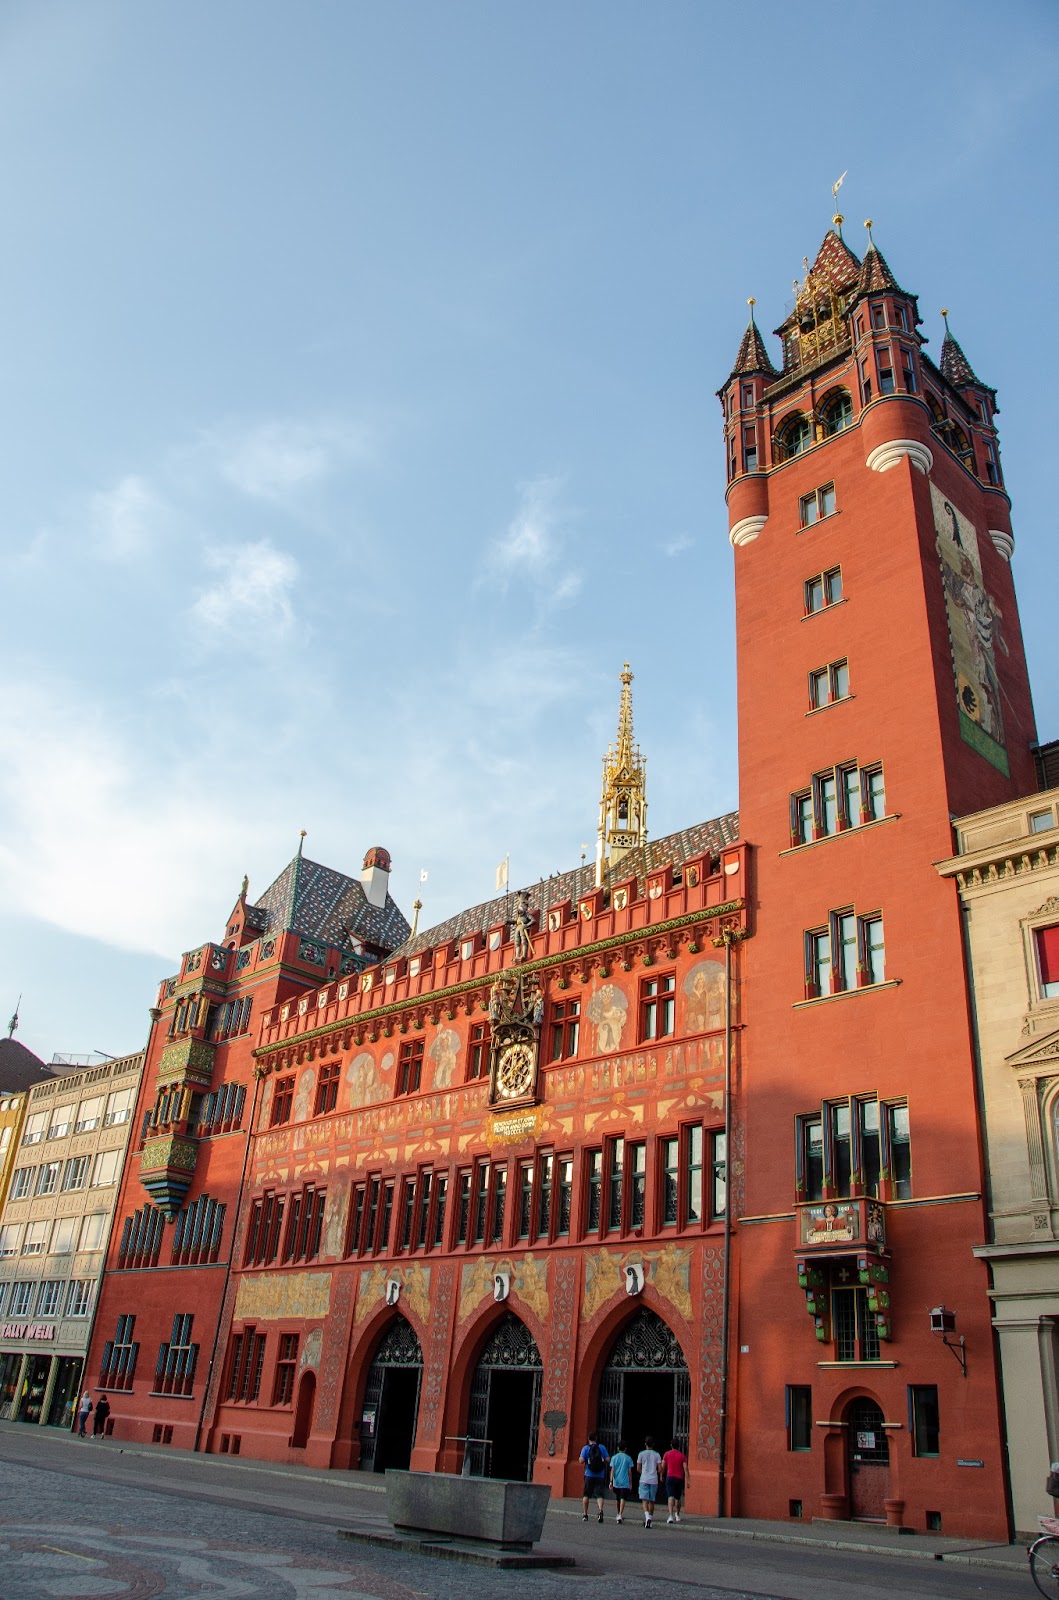 Basel's Marktplatz - Iconic Rathaus surrounded by medieval charm.